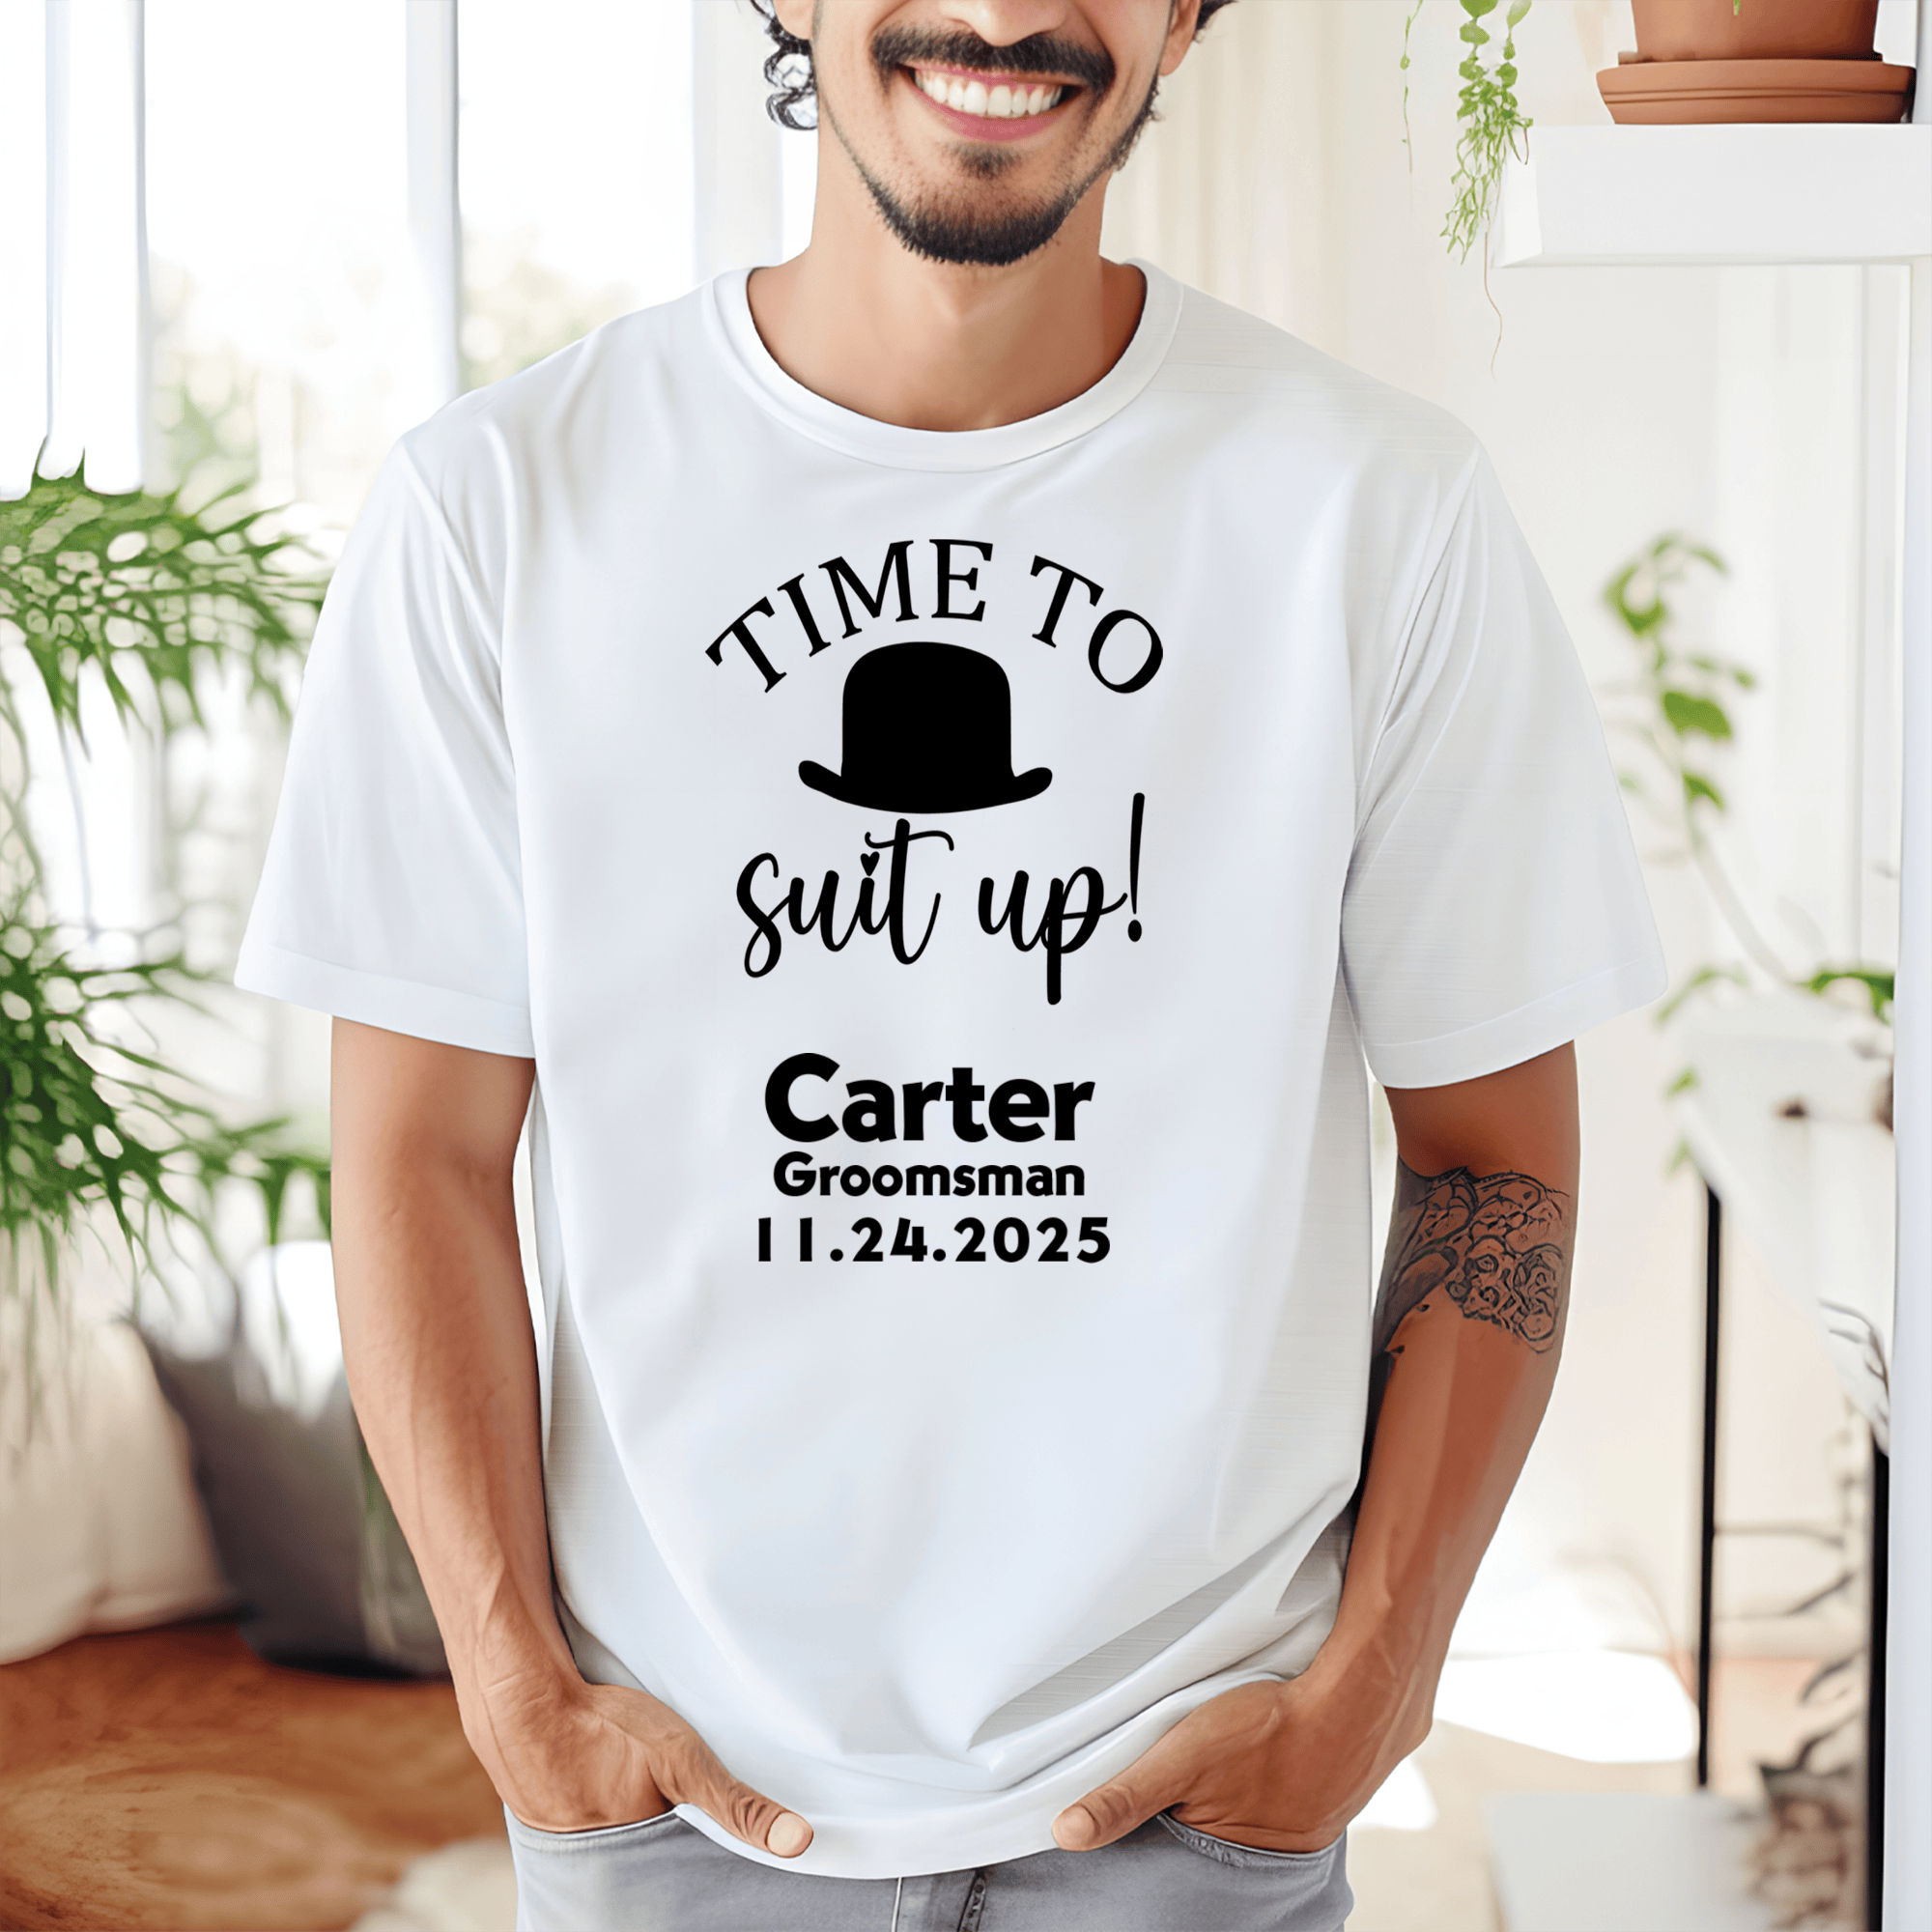 Mens White T Shirt with Timeless-Friend design